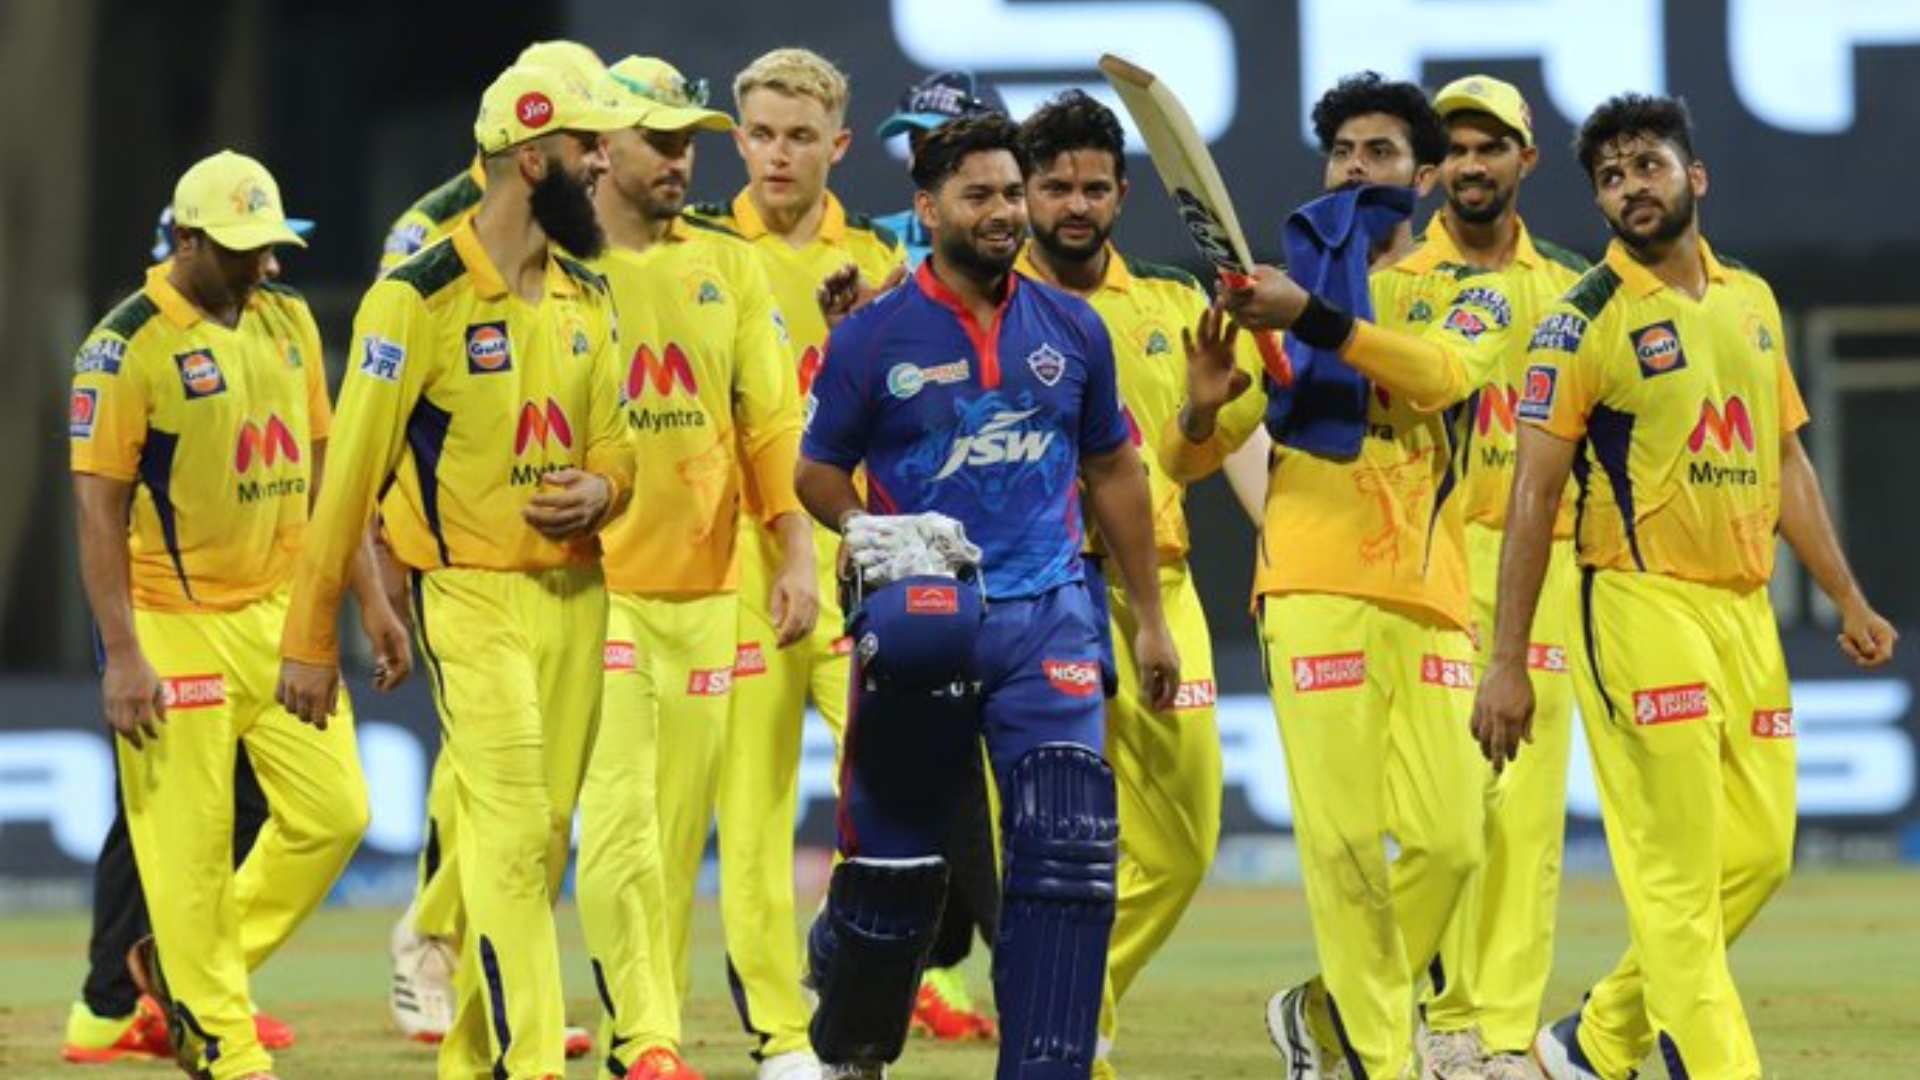 Rishabh Pant started off his captaincy on a great note as Delhi Capitals won for the third consecutive time against Chennai Super Kings in IPL.